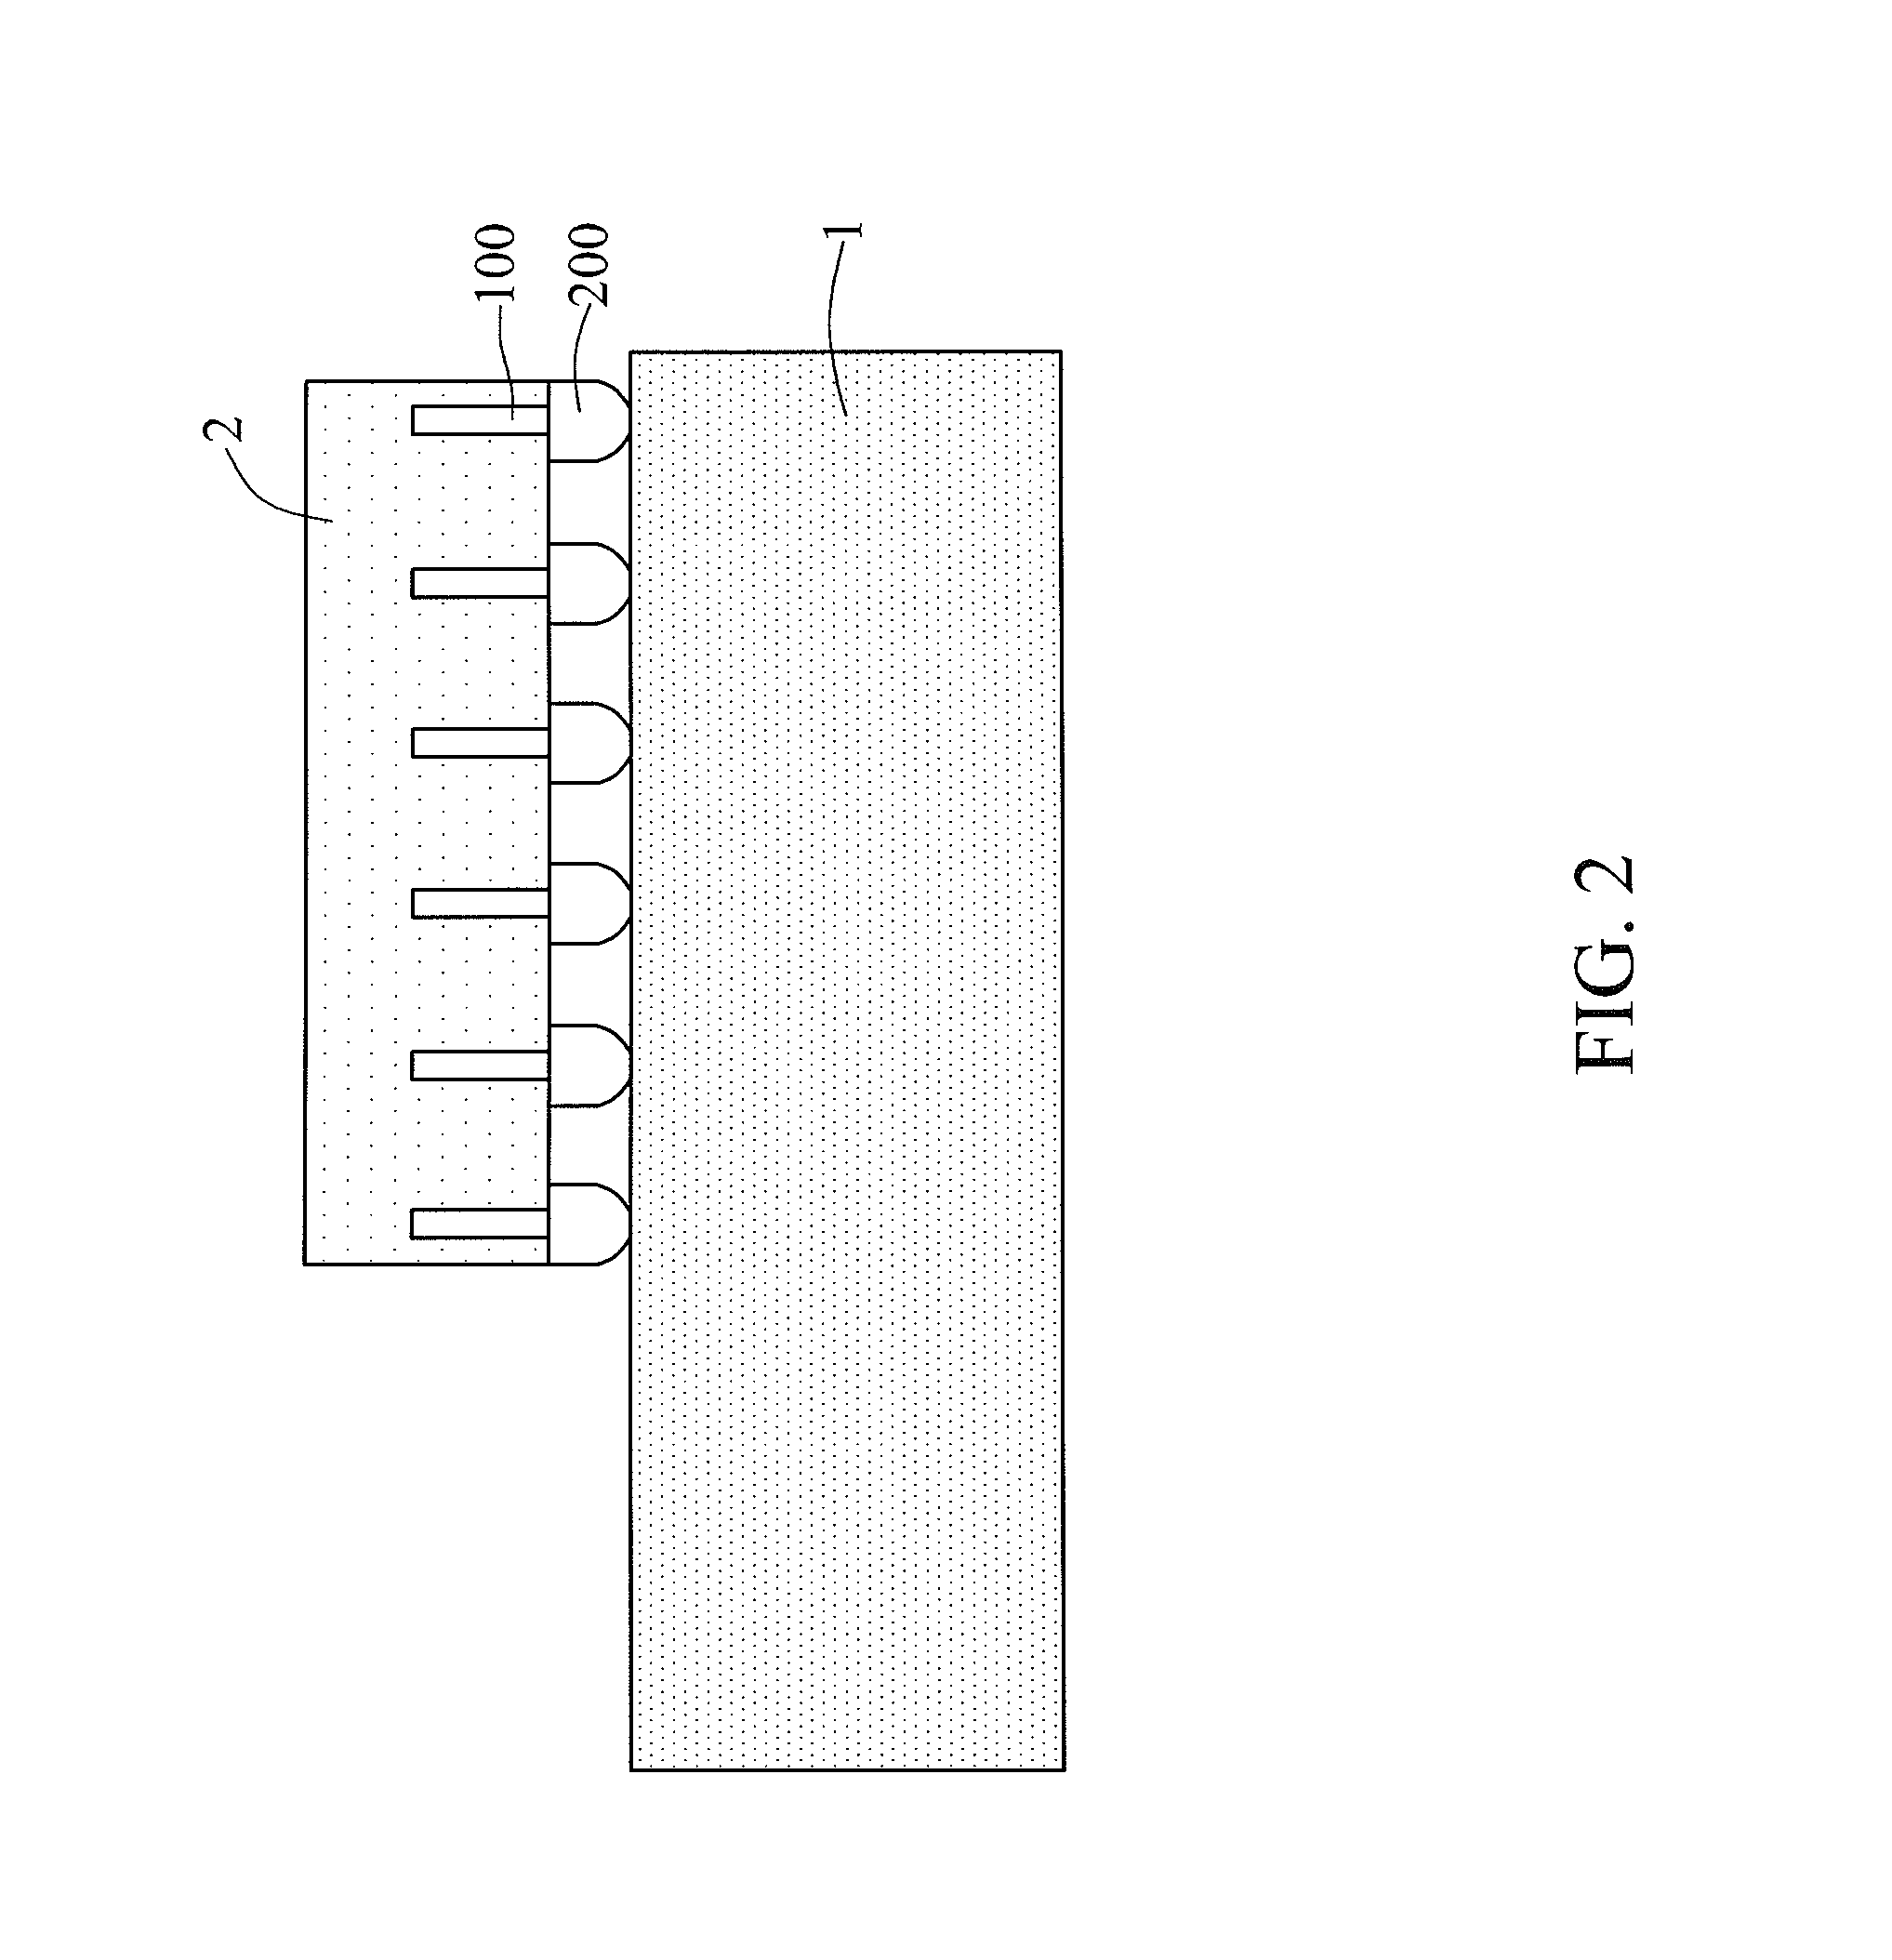 Stacked Integrated Circuit System